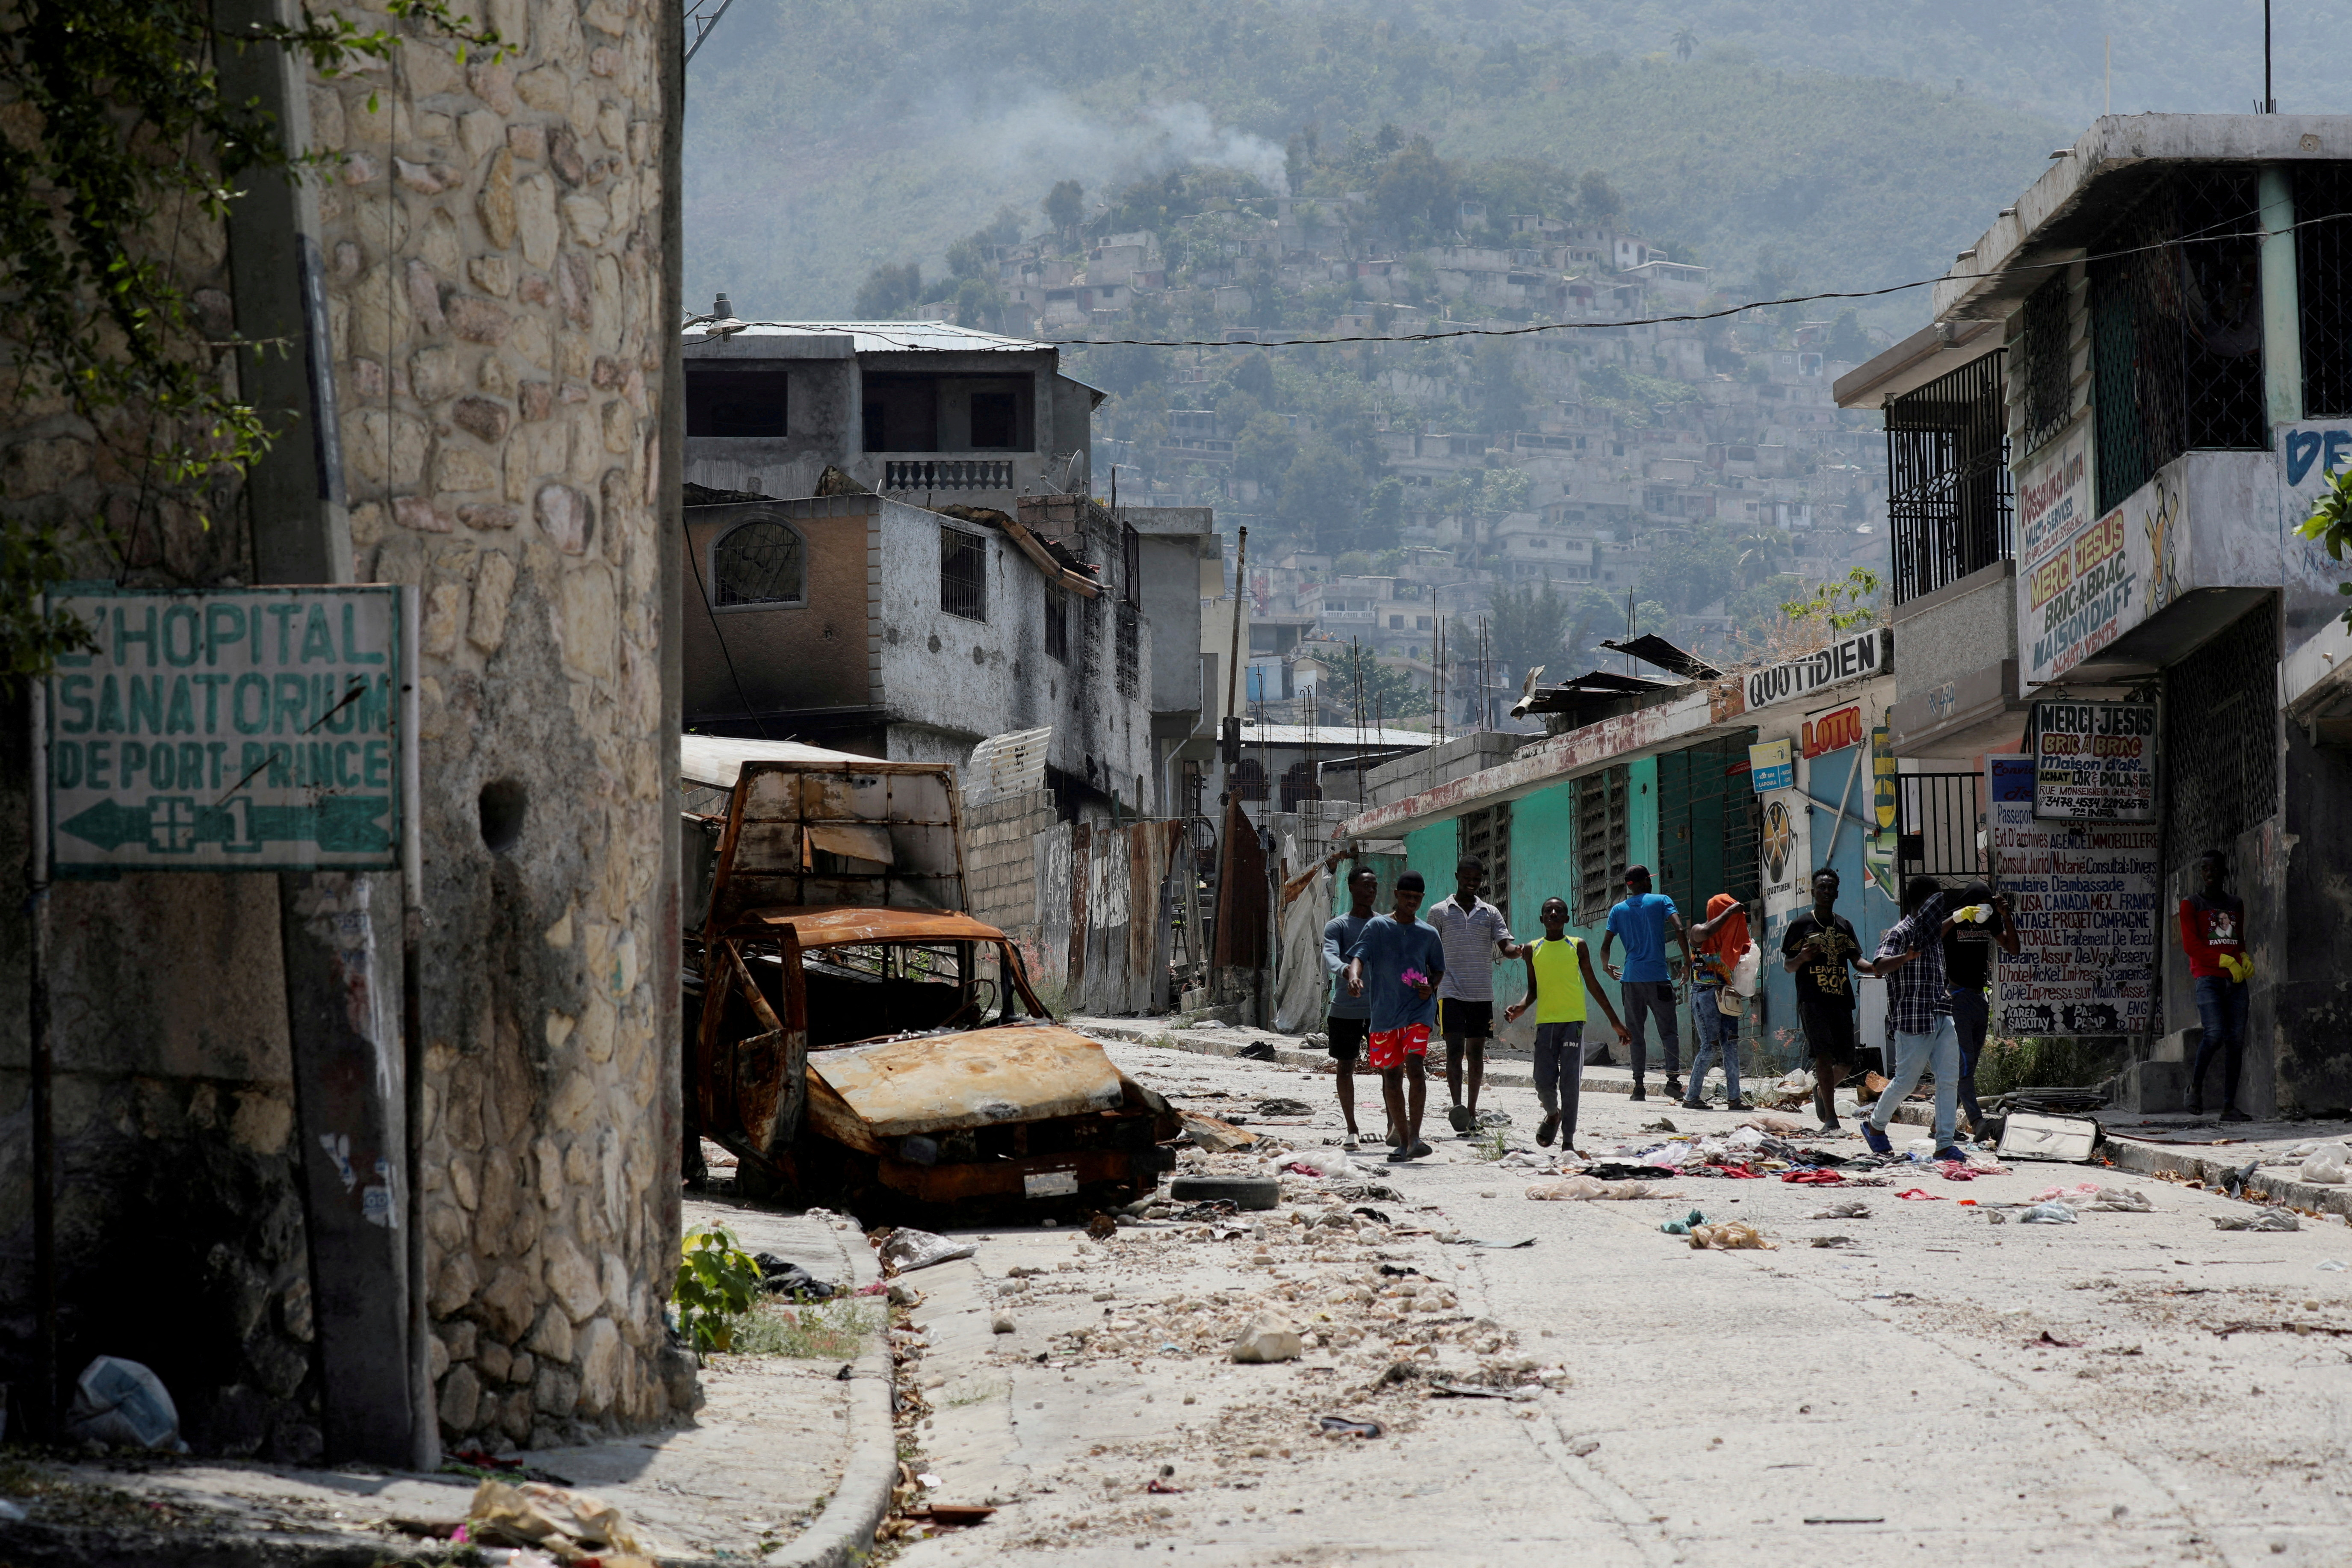 Alleged gang leader calls on supporters to retake control of neighborhood, in Port-au-Prince